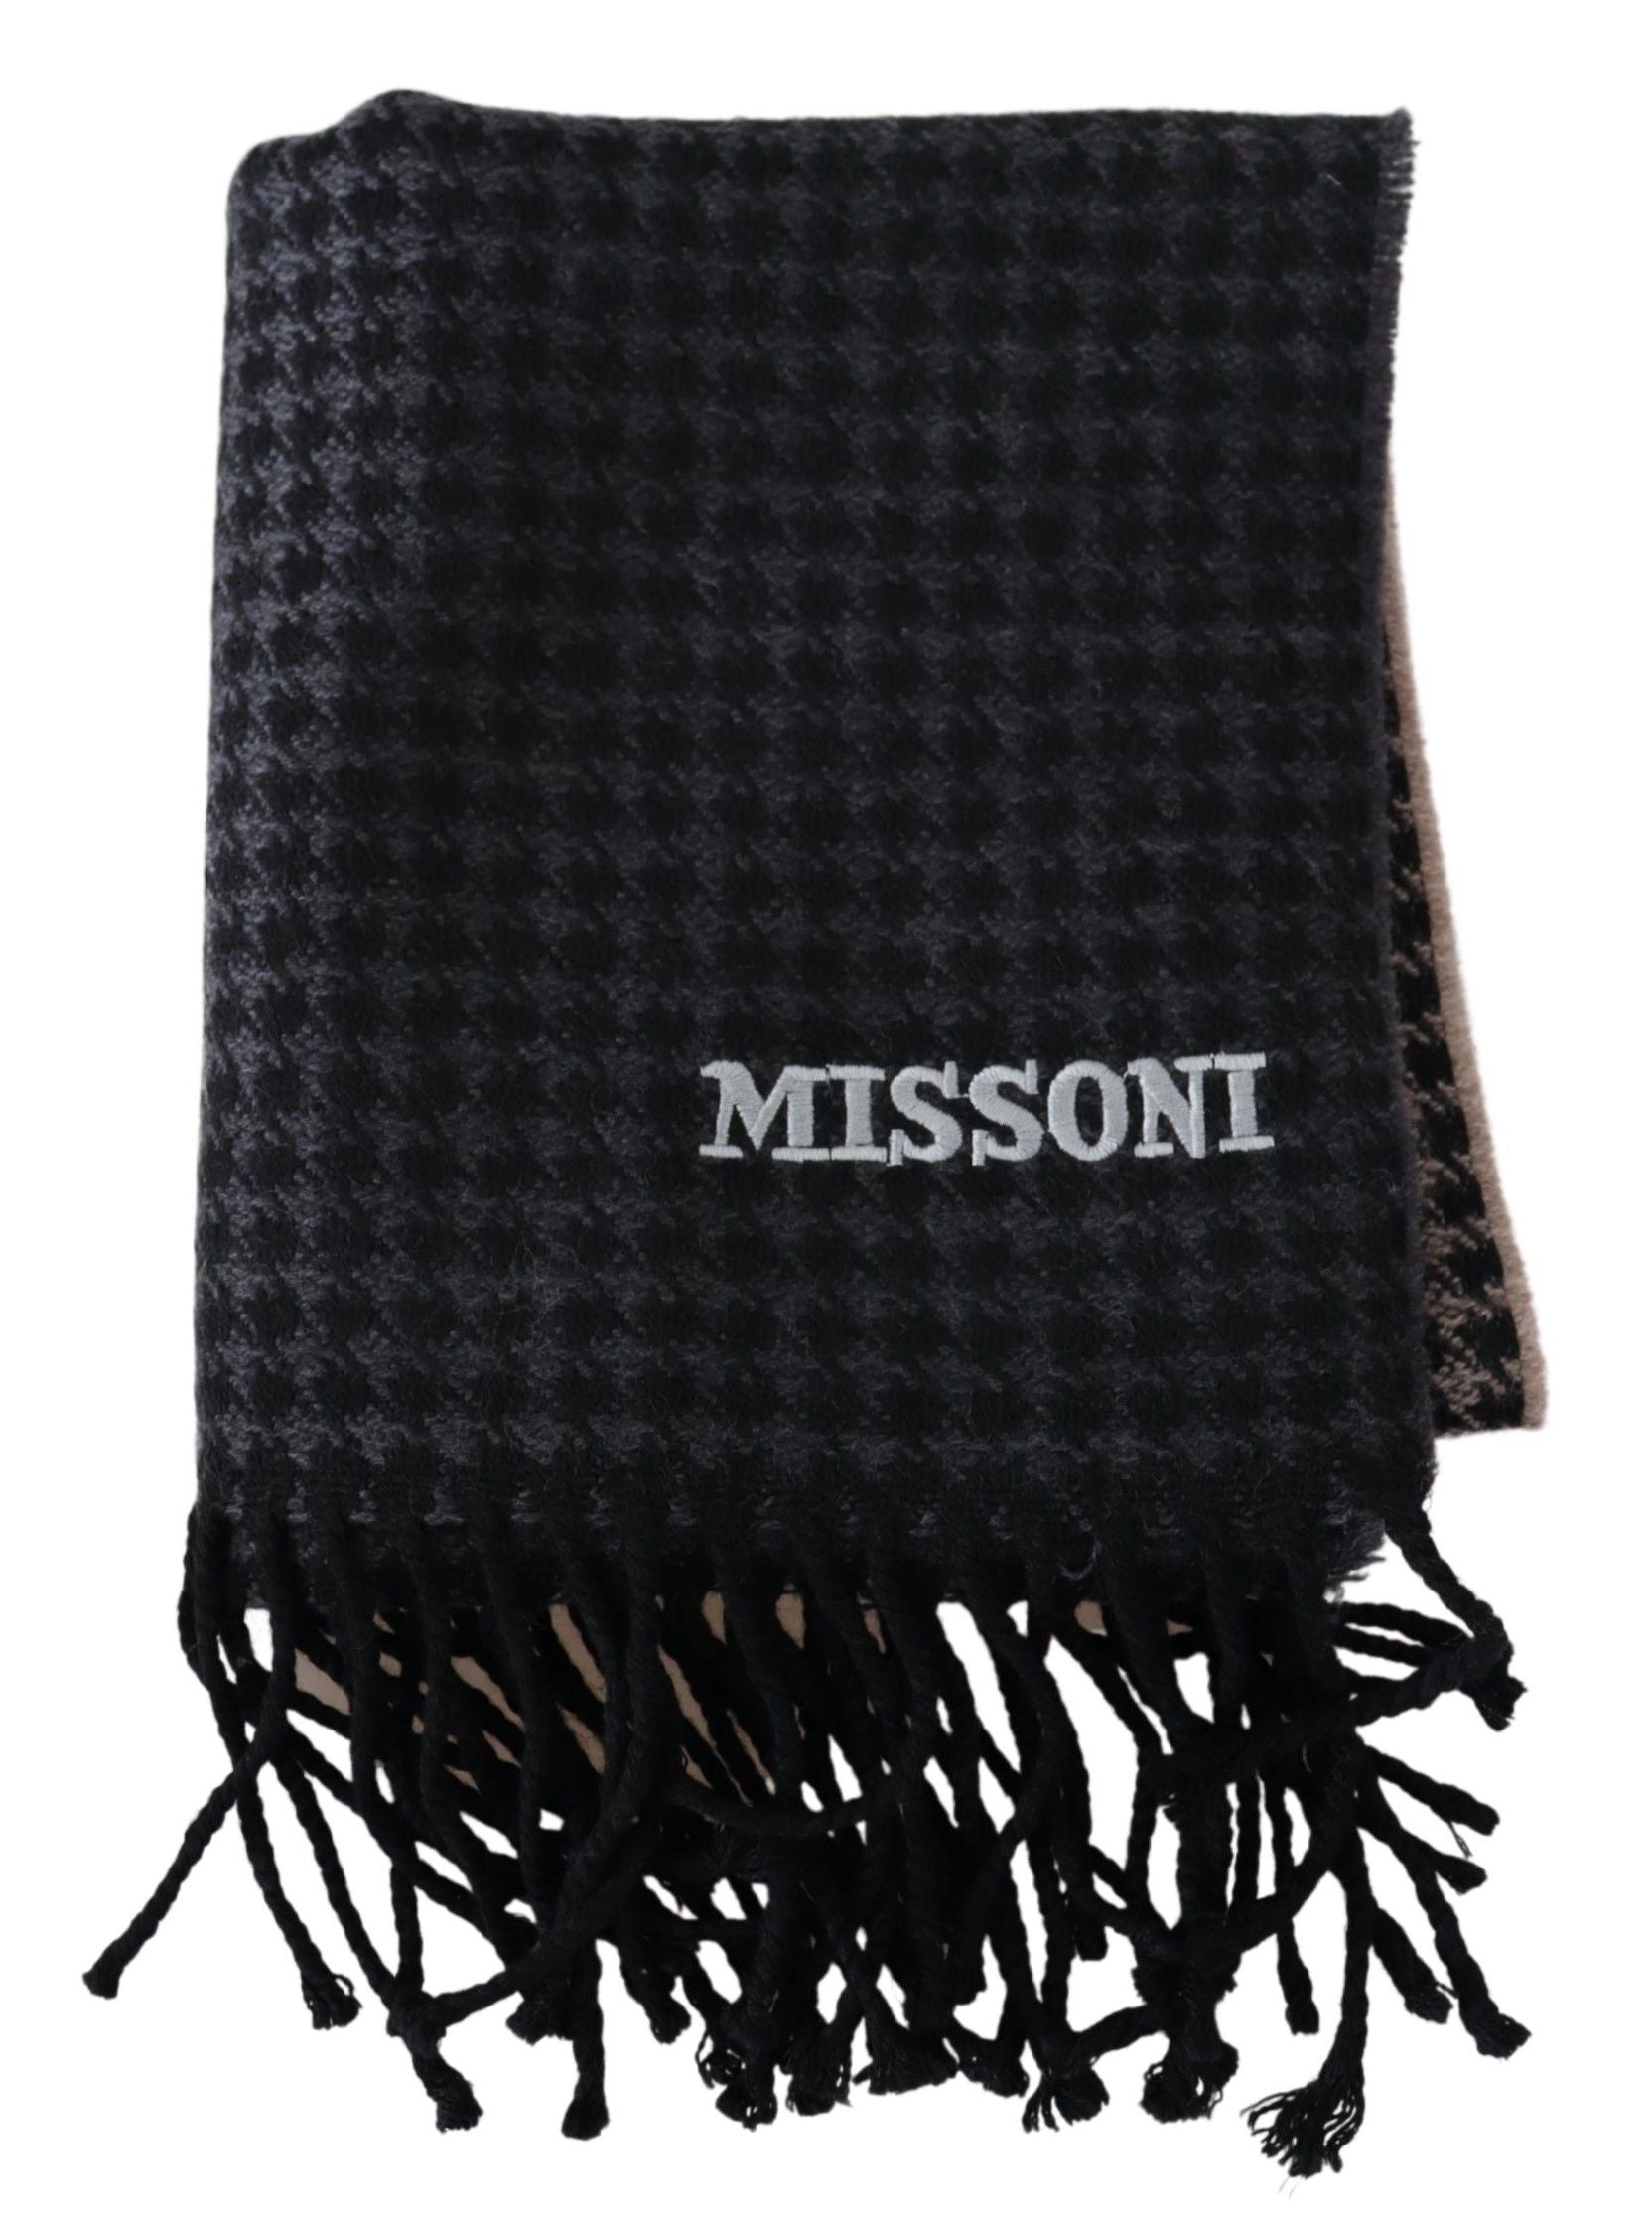 Missoni Multicolor Wool Houndstooth Unisex Neck Wrap Scarf